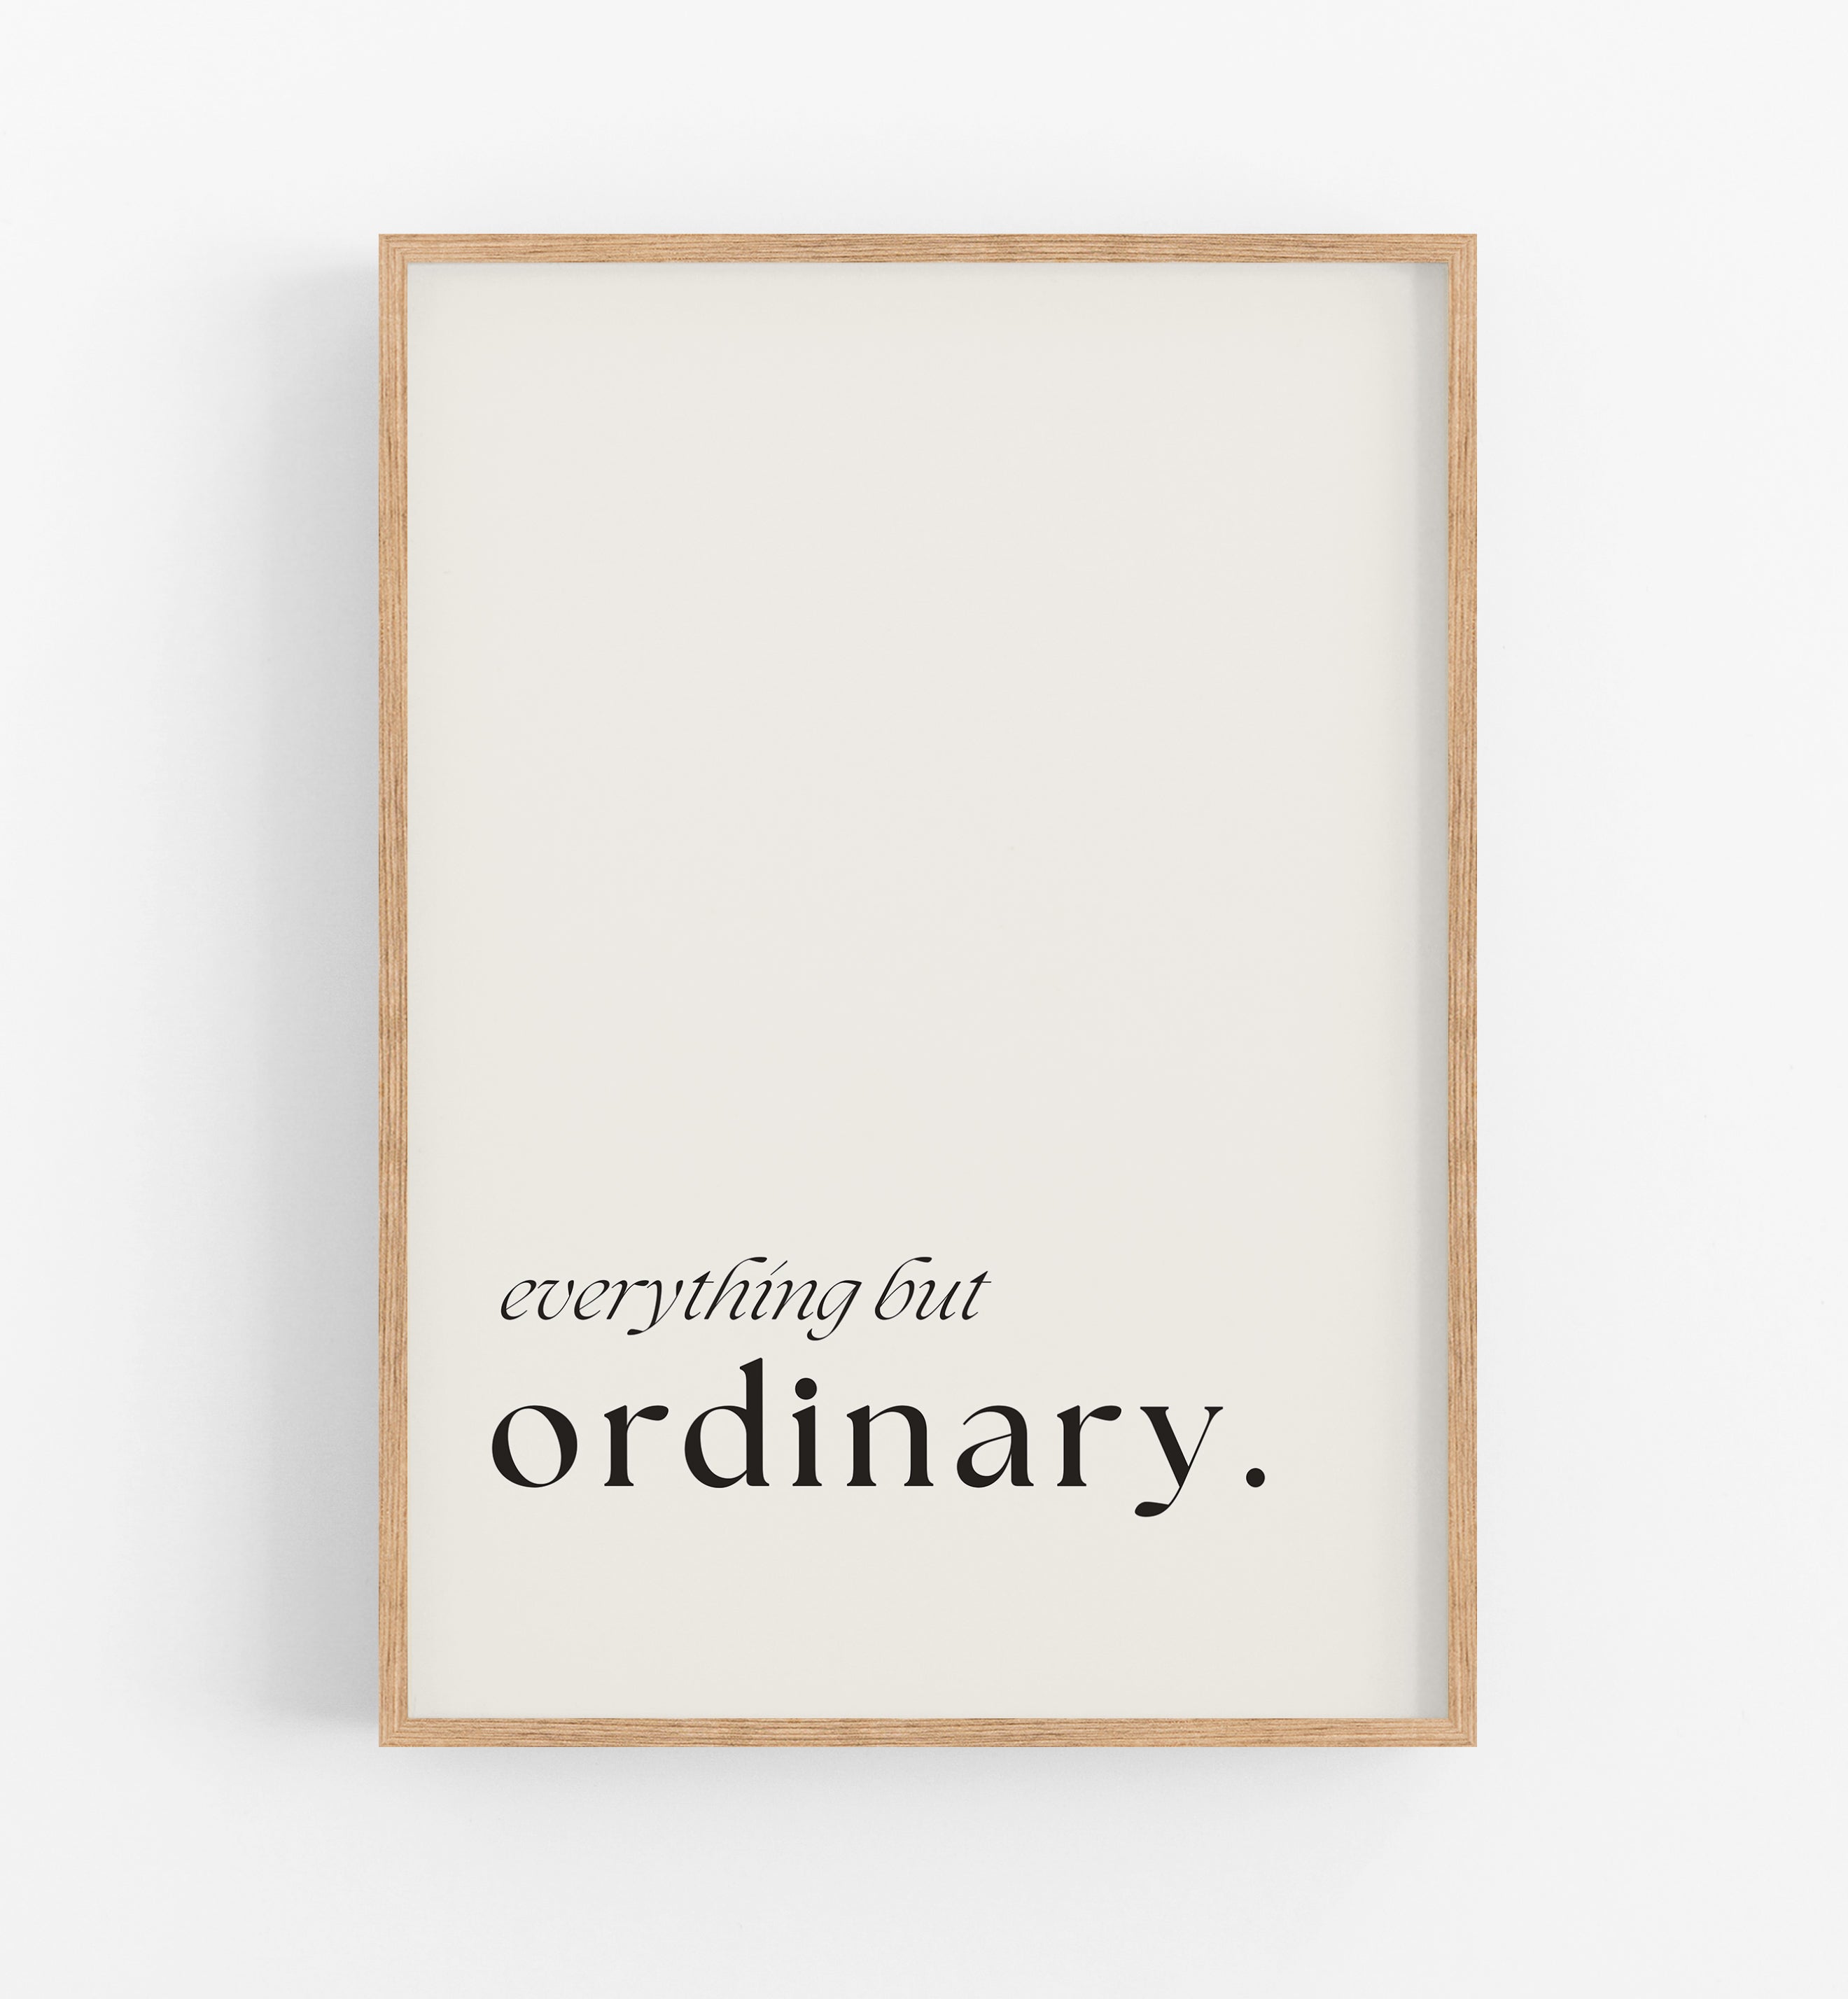 But Ordinary